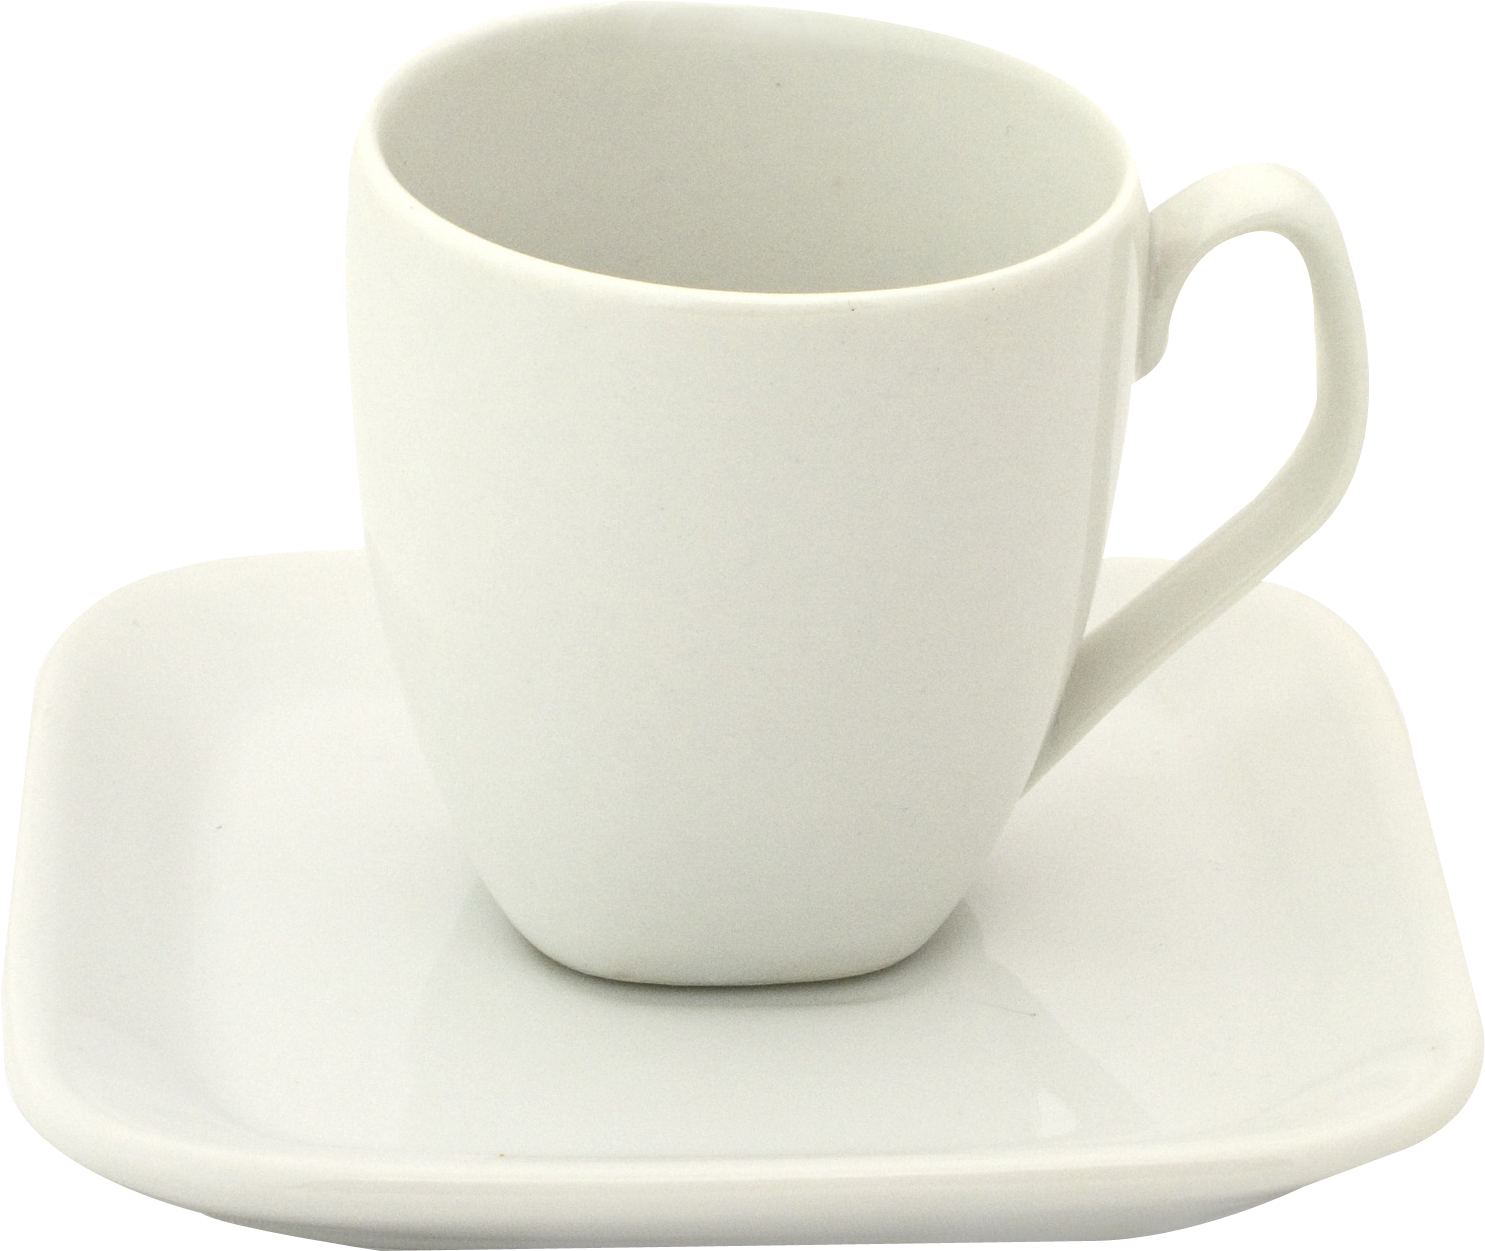 Cup Hd Png Pluspng Empty Cup Png